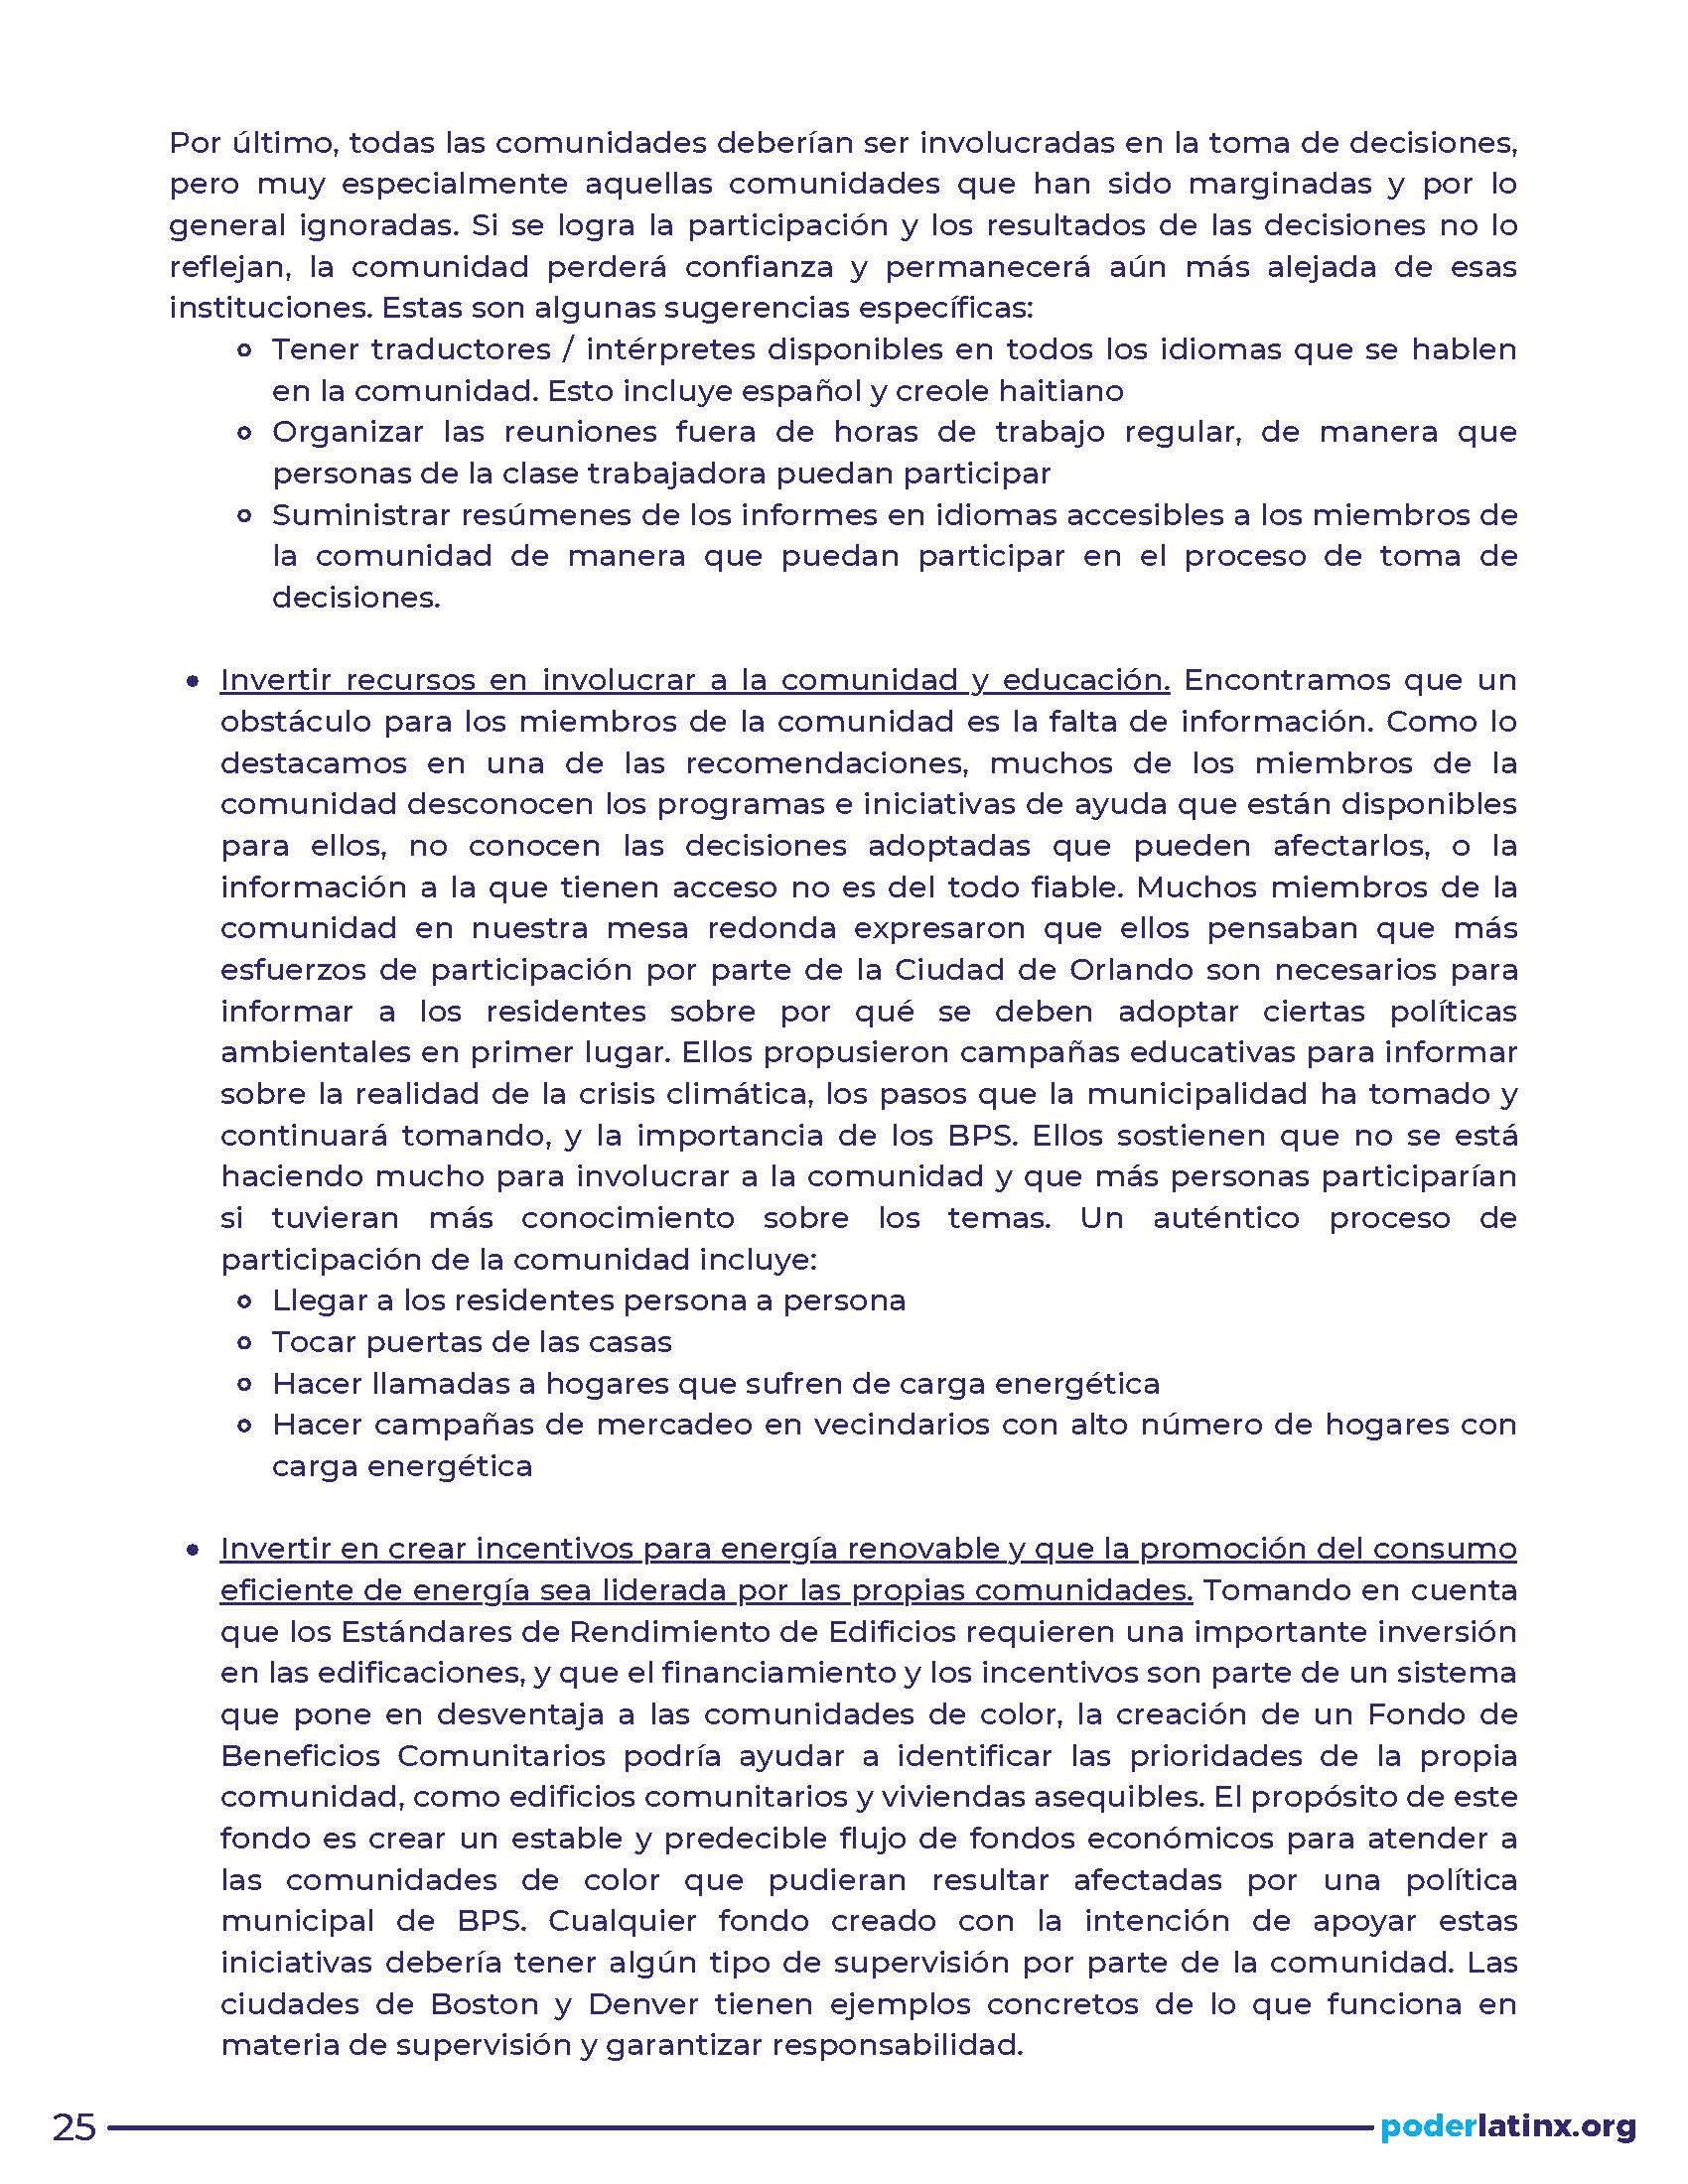 IMT Report - Spanish_Page_25.jpg